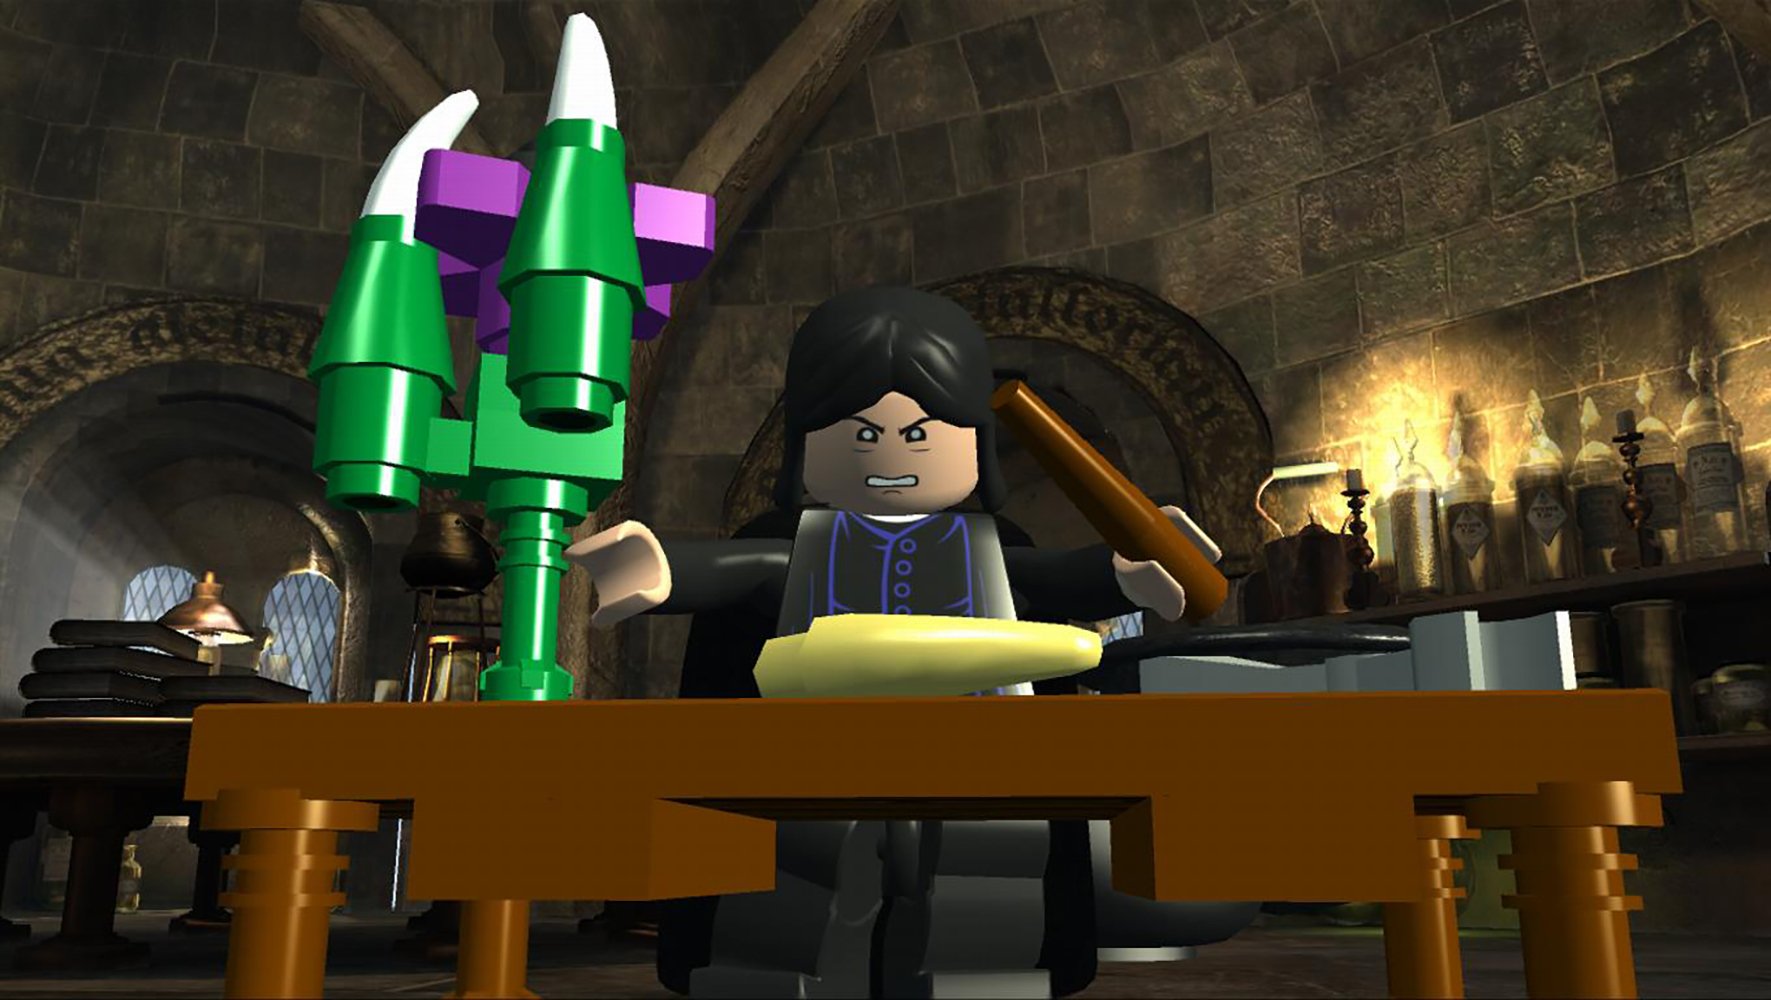 lego-harry-potter-cheats-full-codes-list-for-years-1-4-years-5-7-on